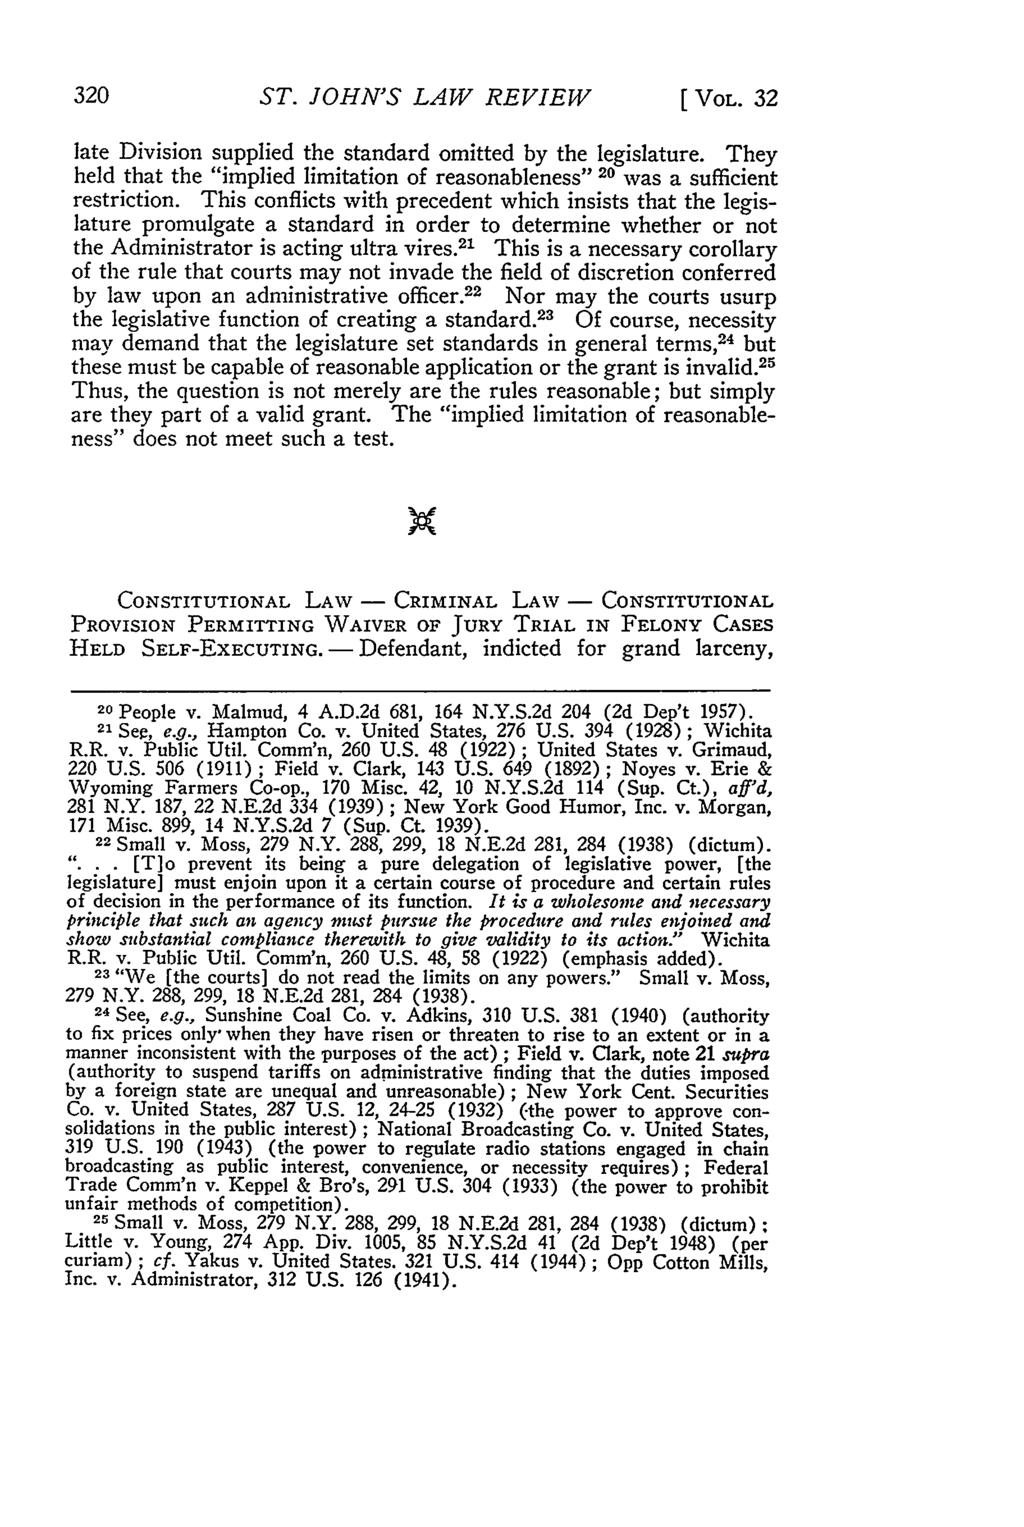 ST. JOHN'S LAW REVIEW [ VOL. 32 late Division supplied the standard omitted by the legislature. They held that the "implied limitation of reasonableness" 20 was a sufficient restriction.